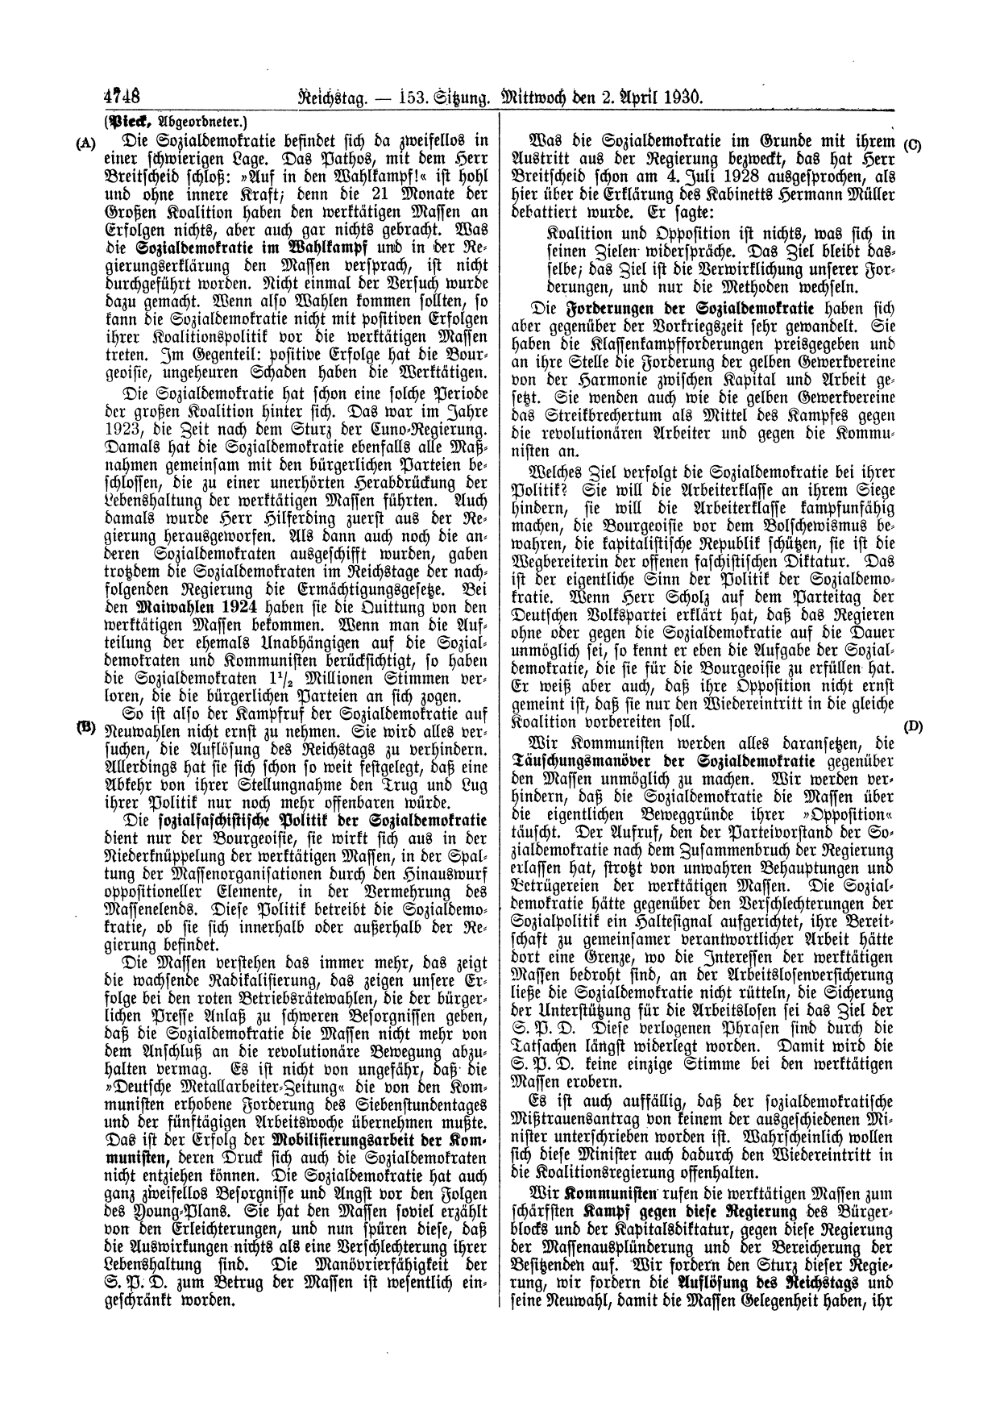 Scan of page 4748